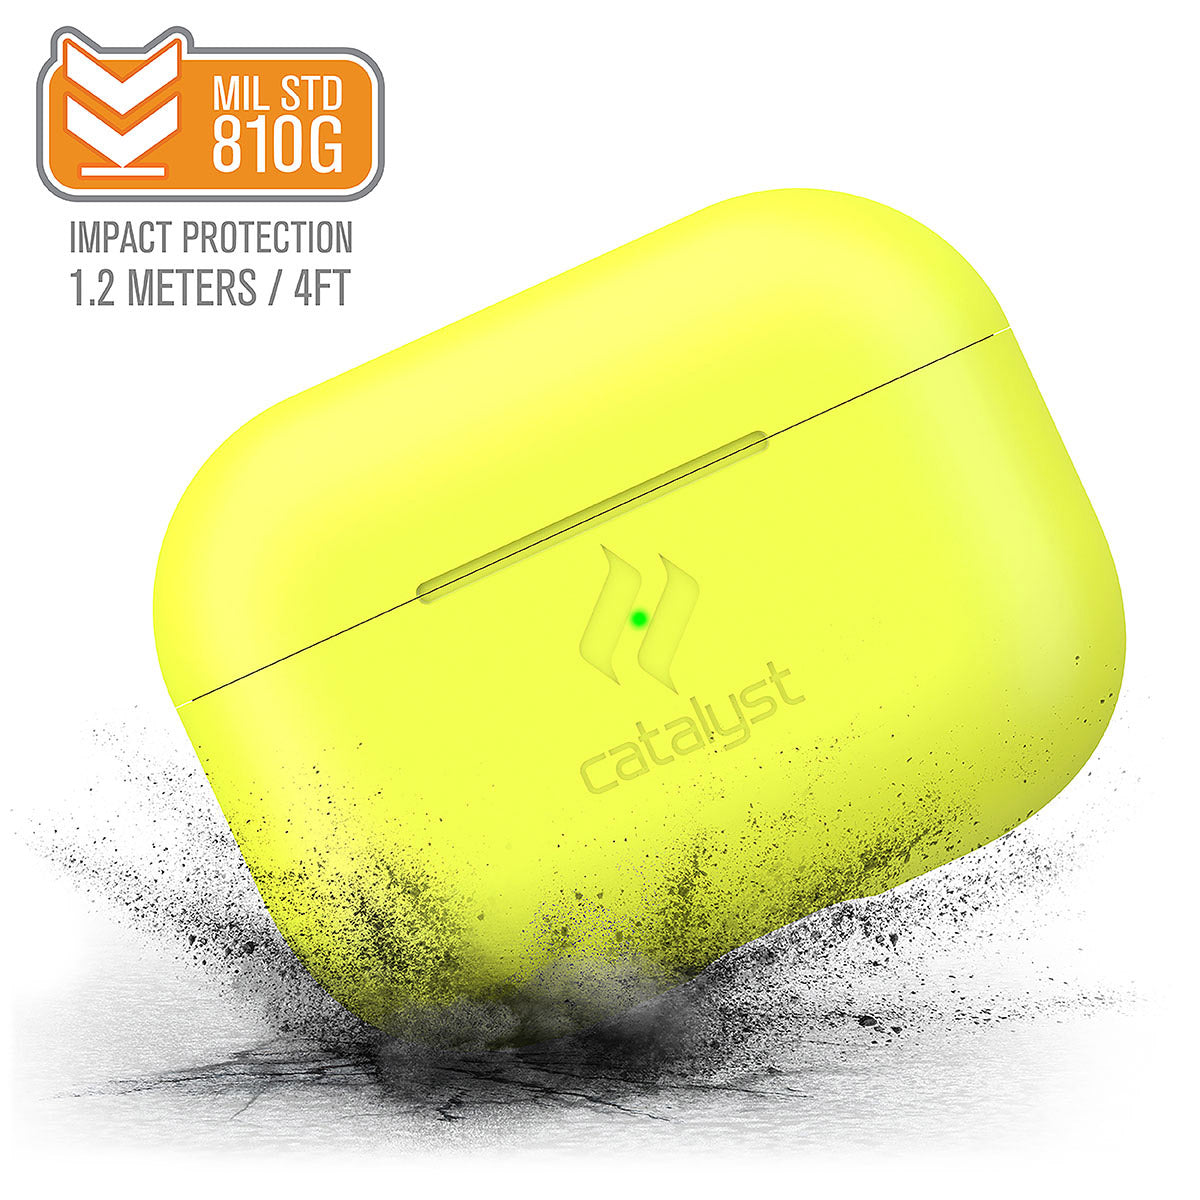 Catalyst airpods pro gen 2/1 slim case showing how drop proof the case is in a neon yellow text reads MIL STD 810G impact protection 1.2 meters/4FT